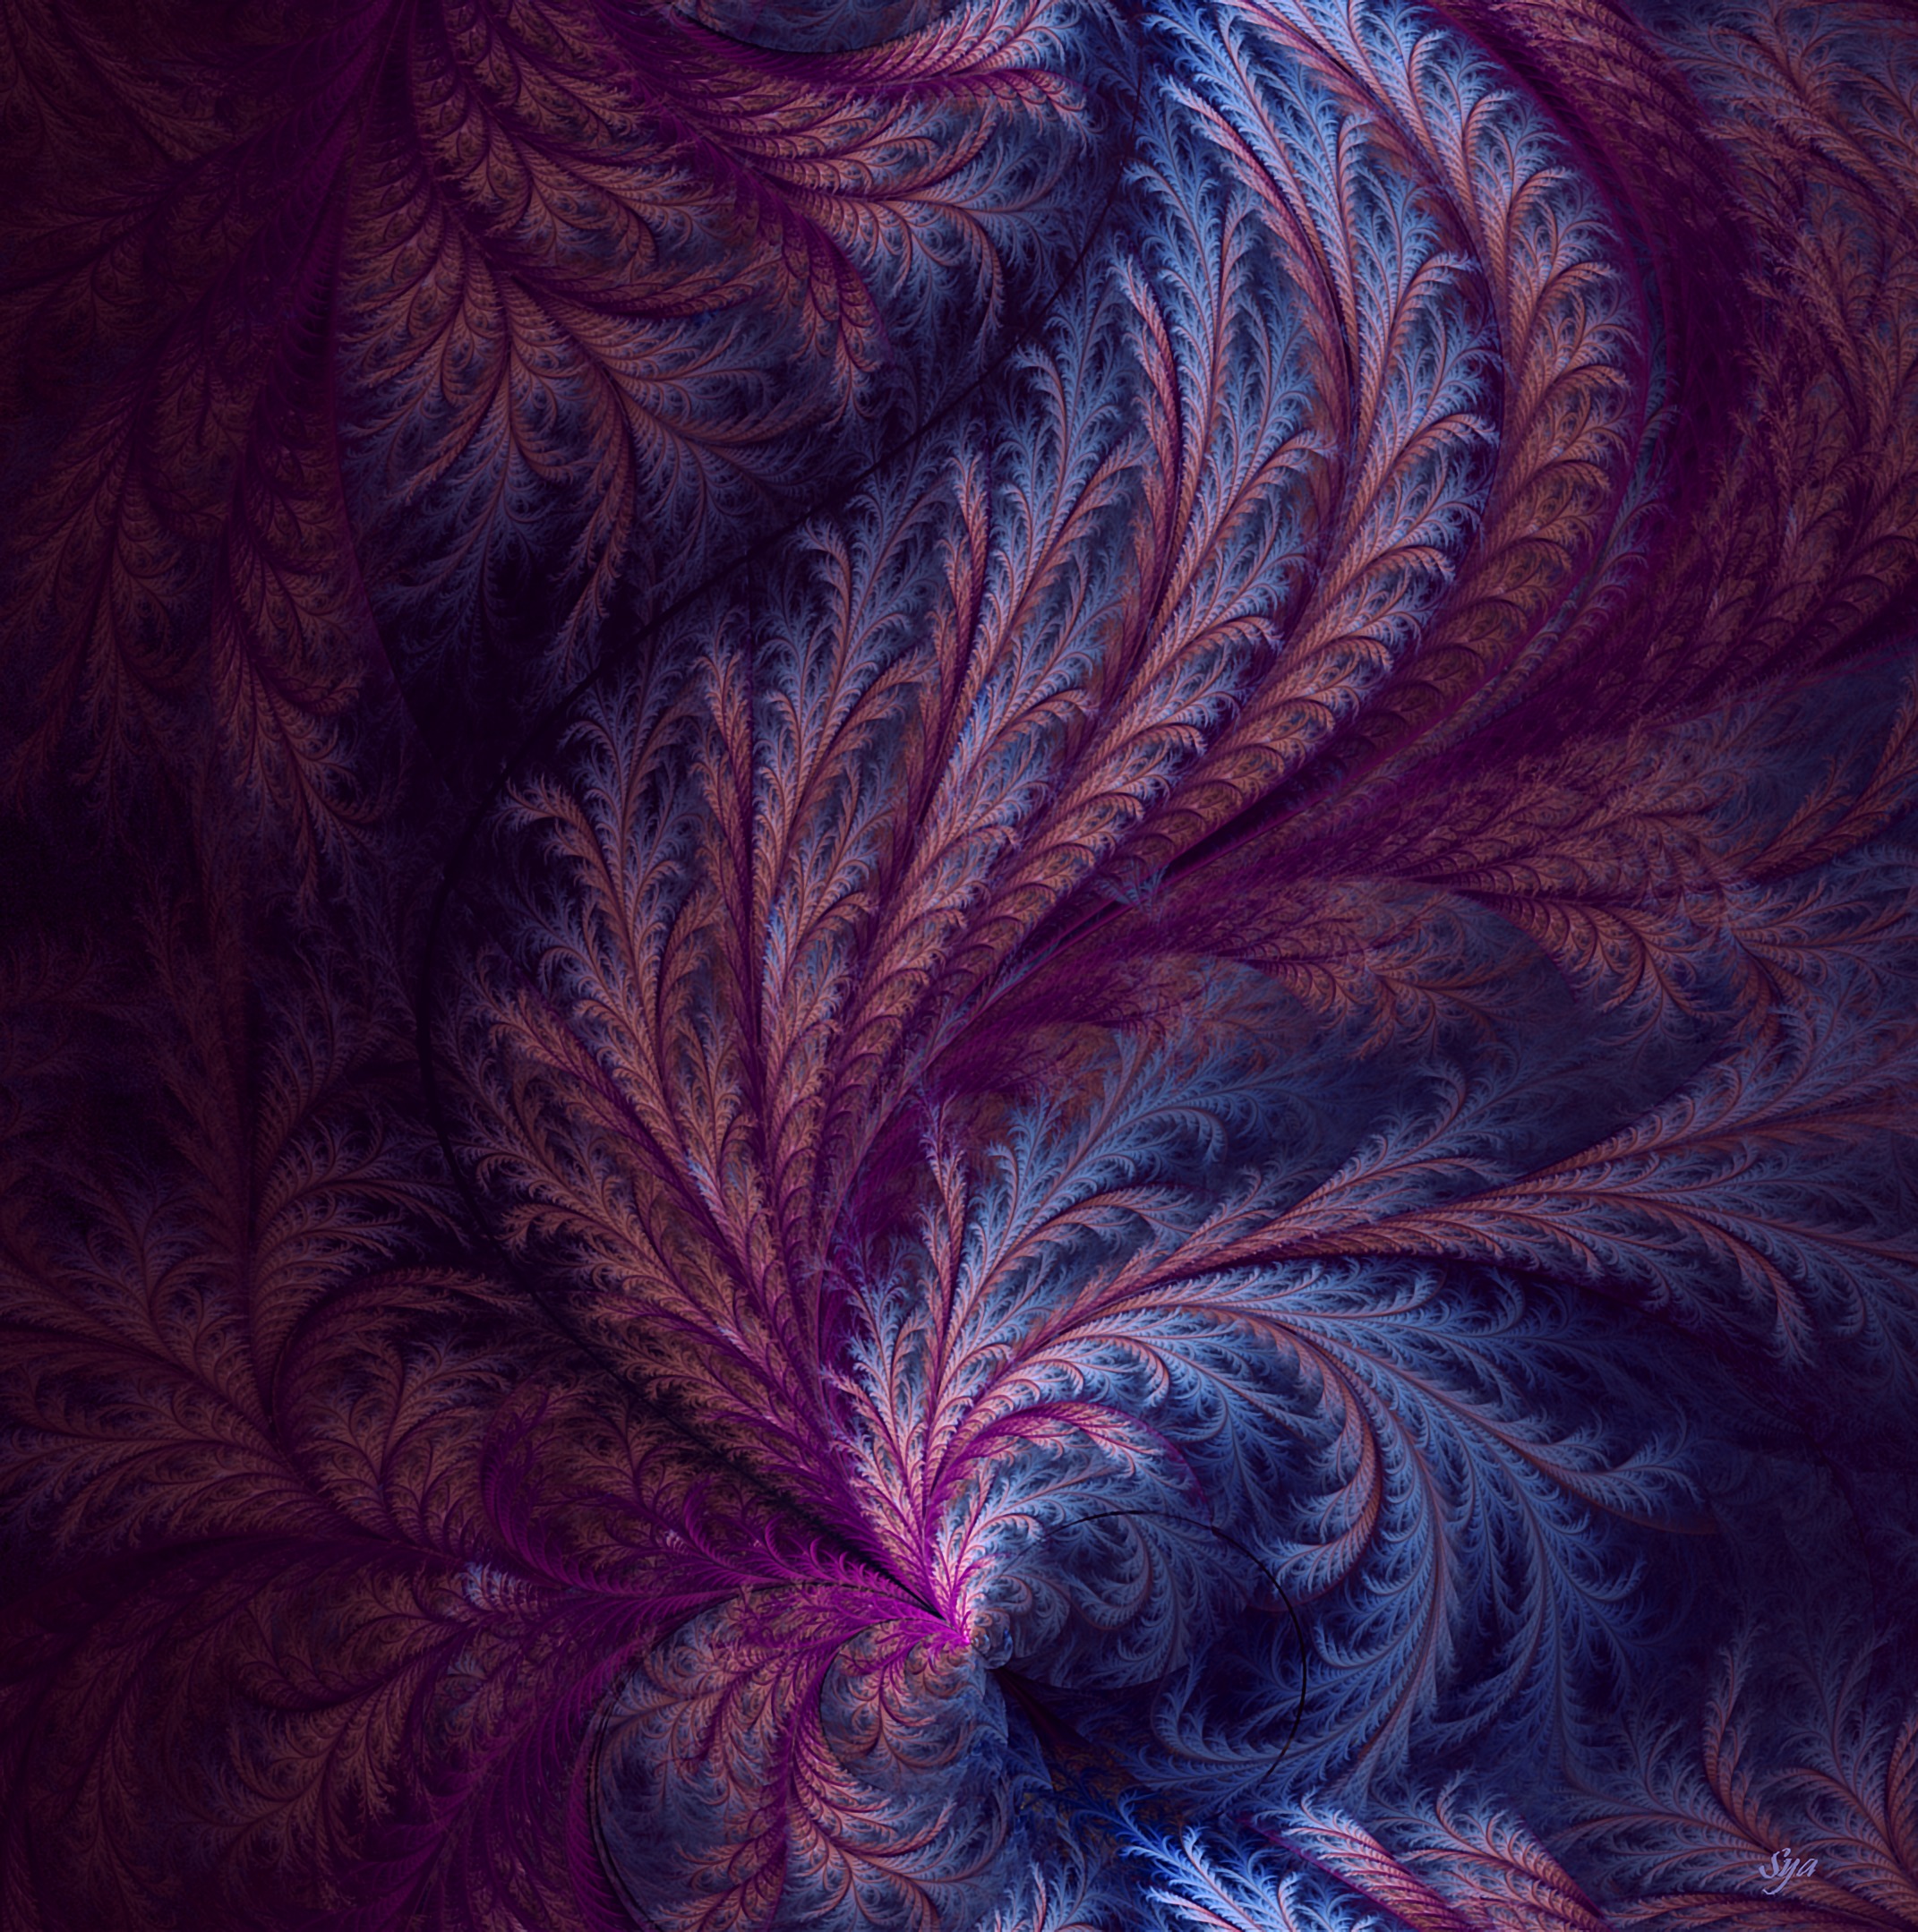 fractal, confused, pattern, branchy, abstract, intricate, branched download HD wallpaper